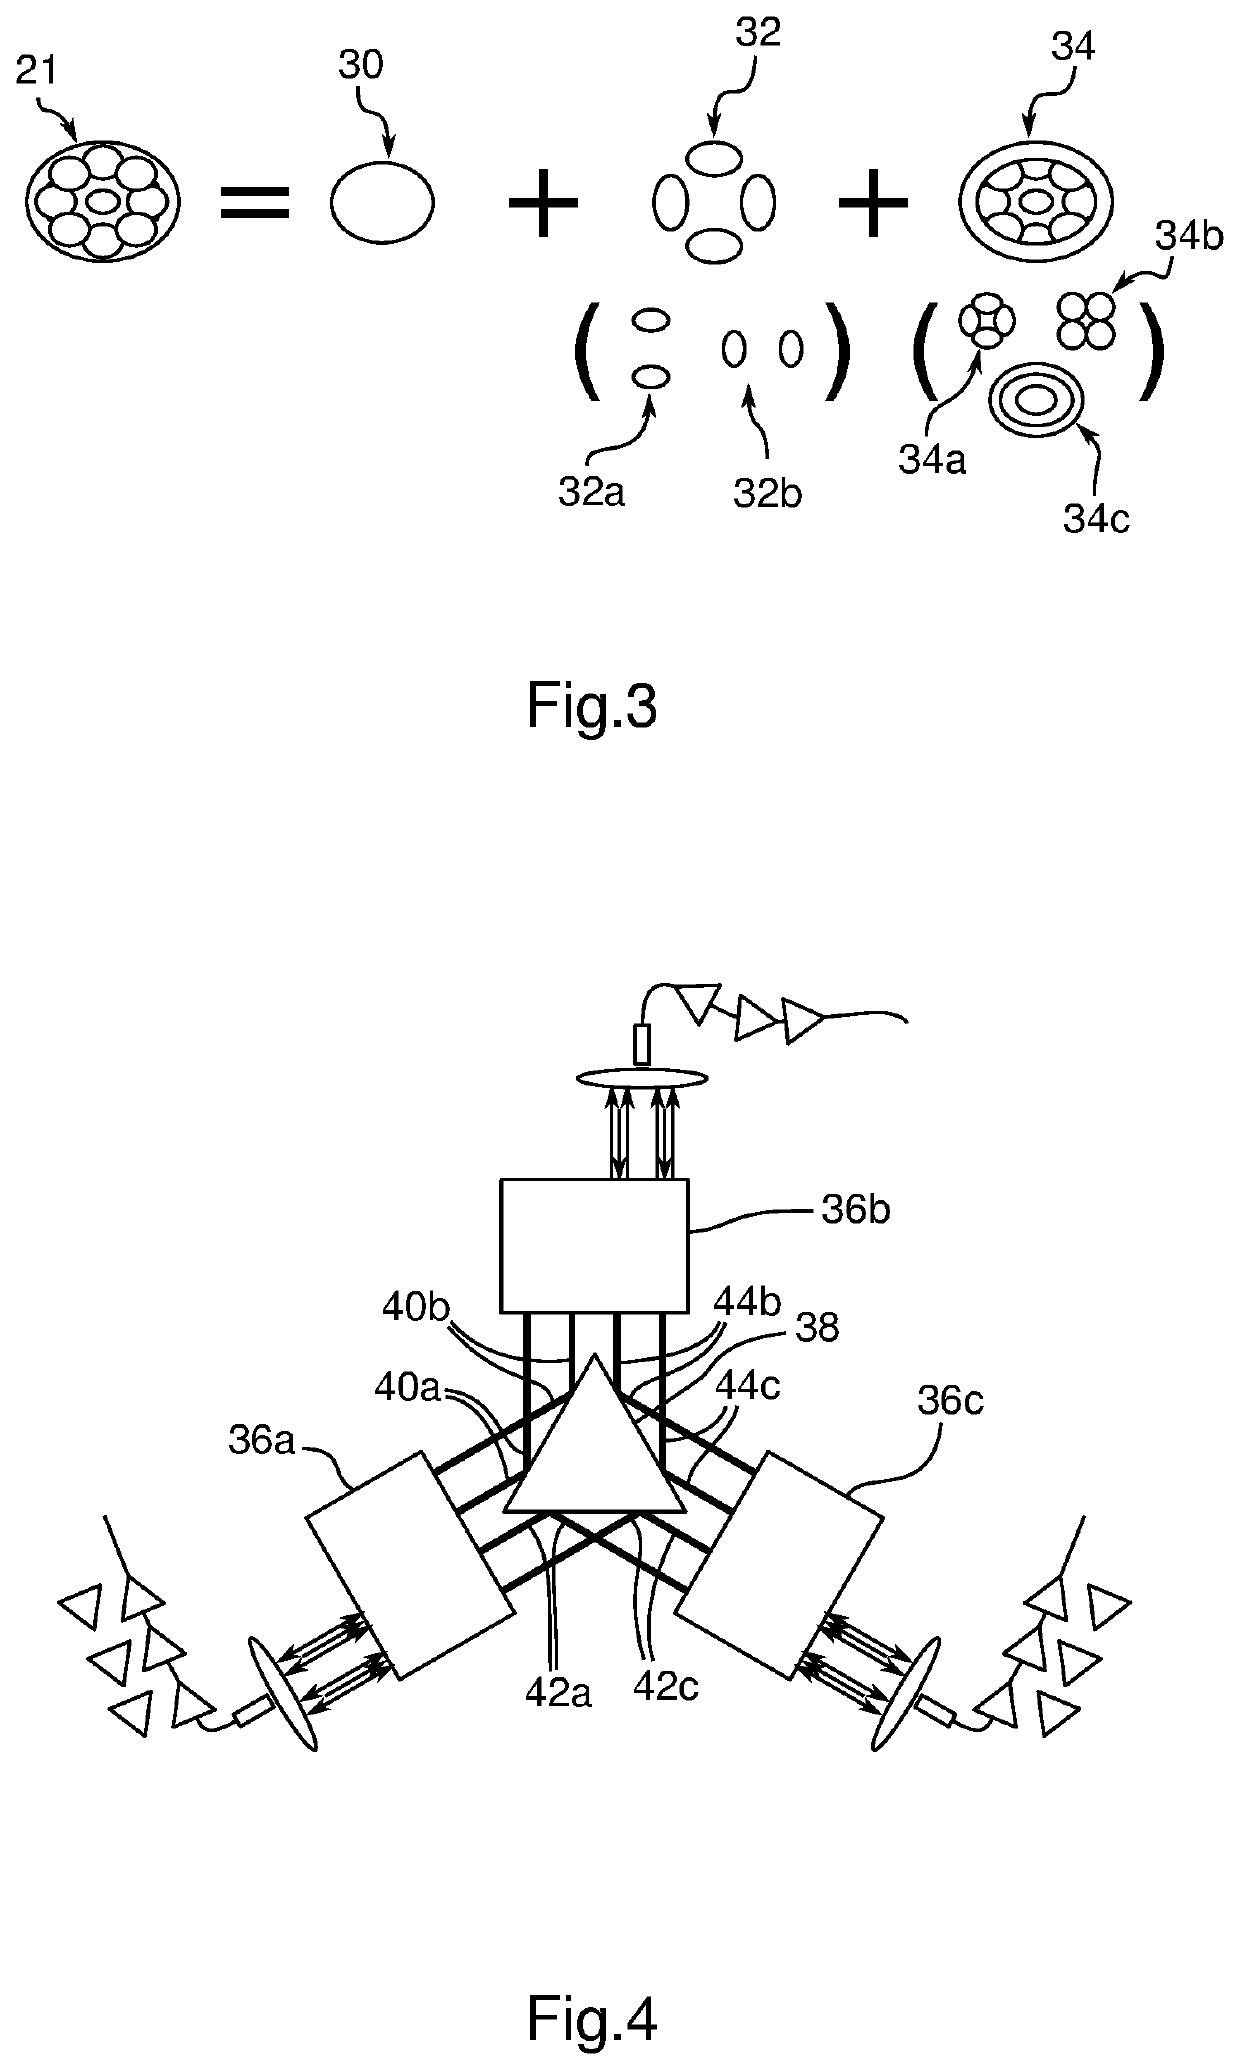 Embedded optical ring communication network for aircraft